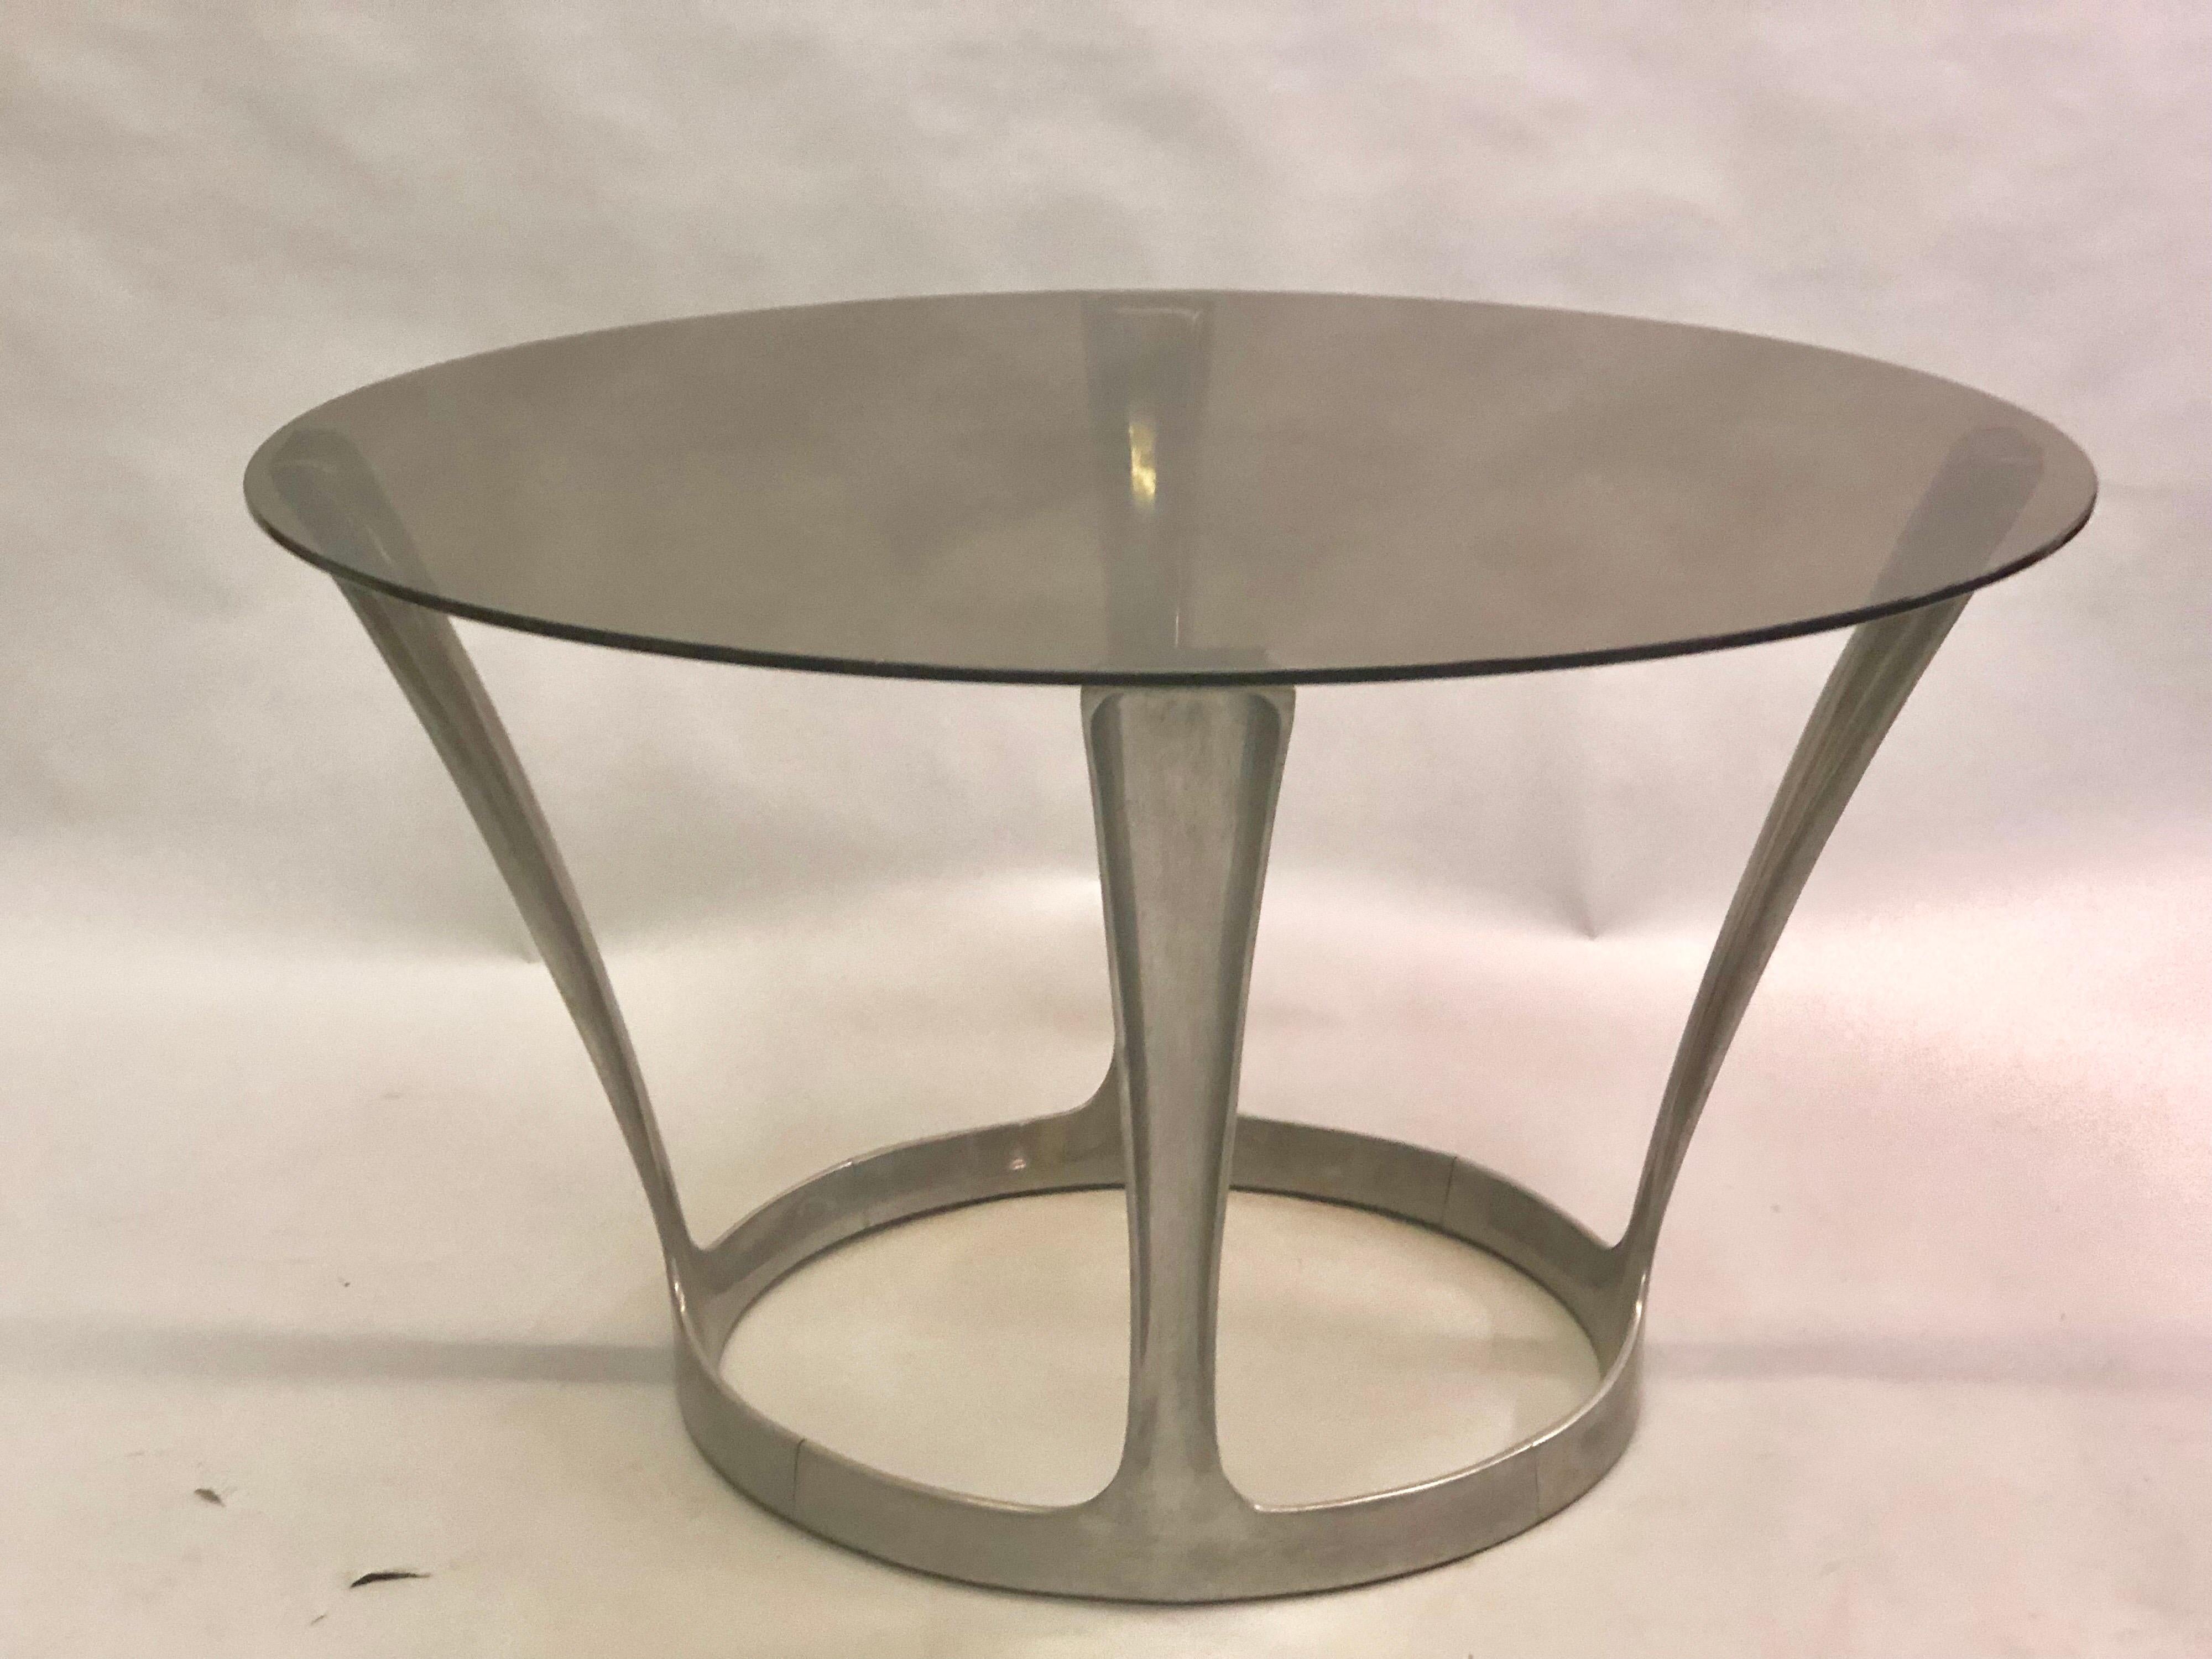 French Mid-Century Modern round center or dining table with a cast aluminum base and a smoked glass top by Boris Tabacoff circa 1960.

We can polish the aluminum base to perfection. 

  